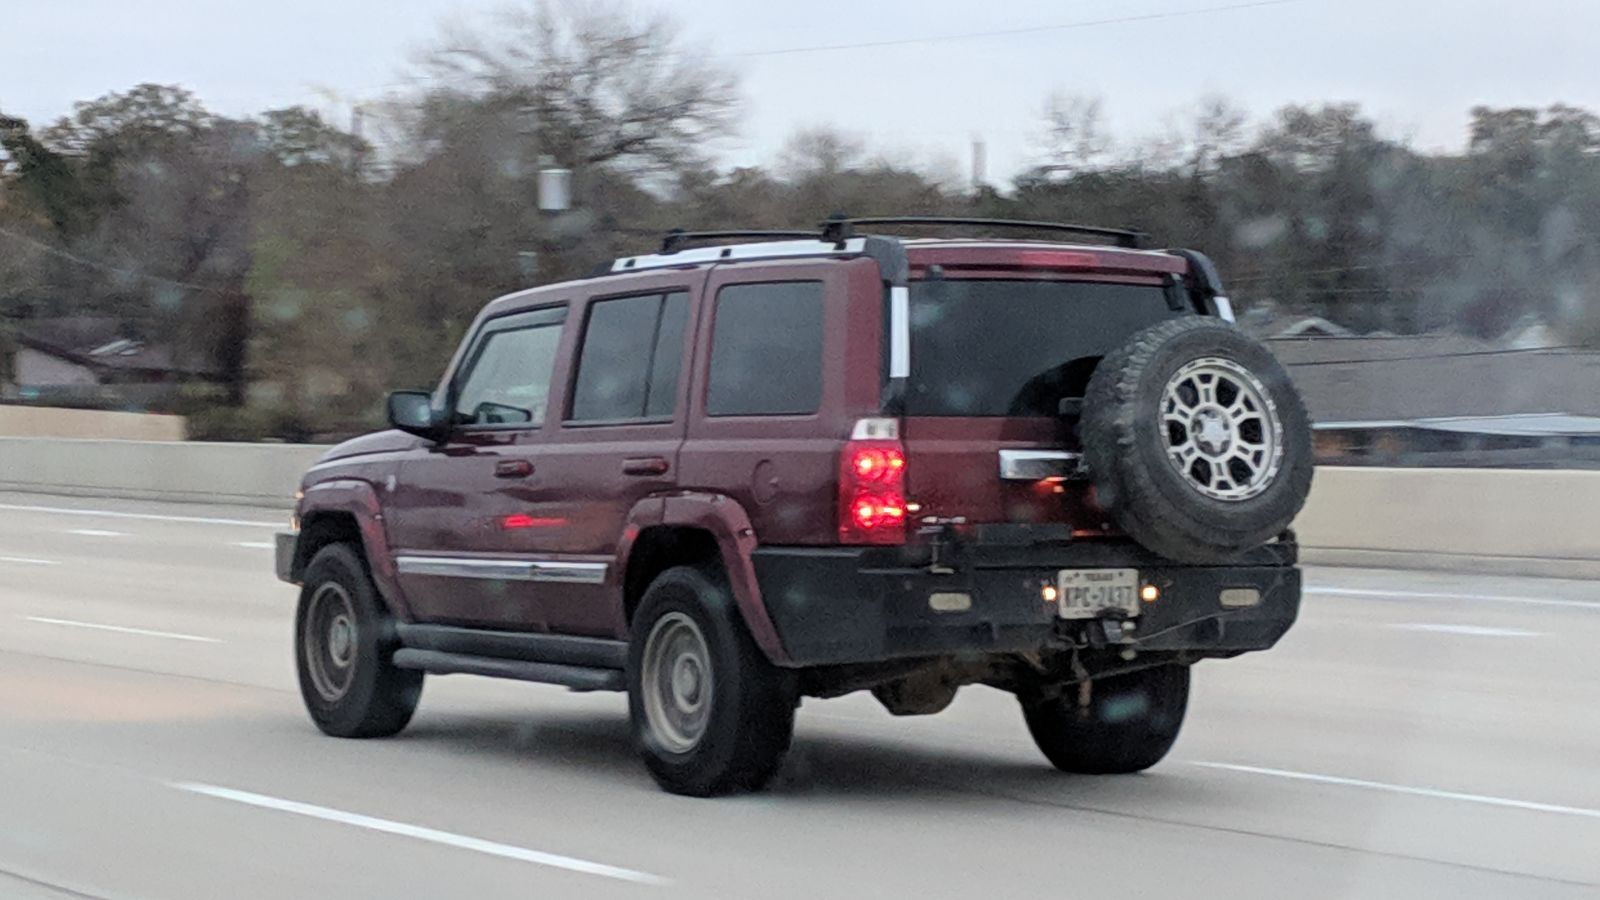 The aftermarket front and rear bumpers really threw me off. I had to get real close to realise it was a regular Jeep lol